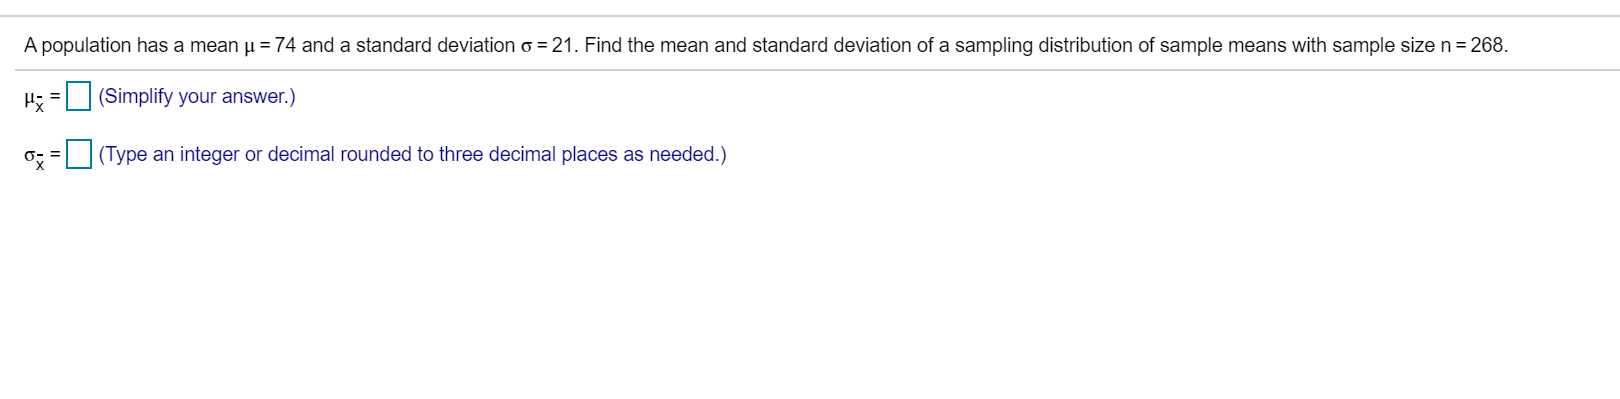 A population has a mean u = 74 and a standard deviation o = 21. Find the mean and standard deviation of a sampling distribution of sample means with sample size n= 268.
